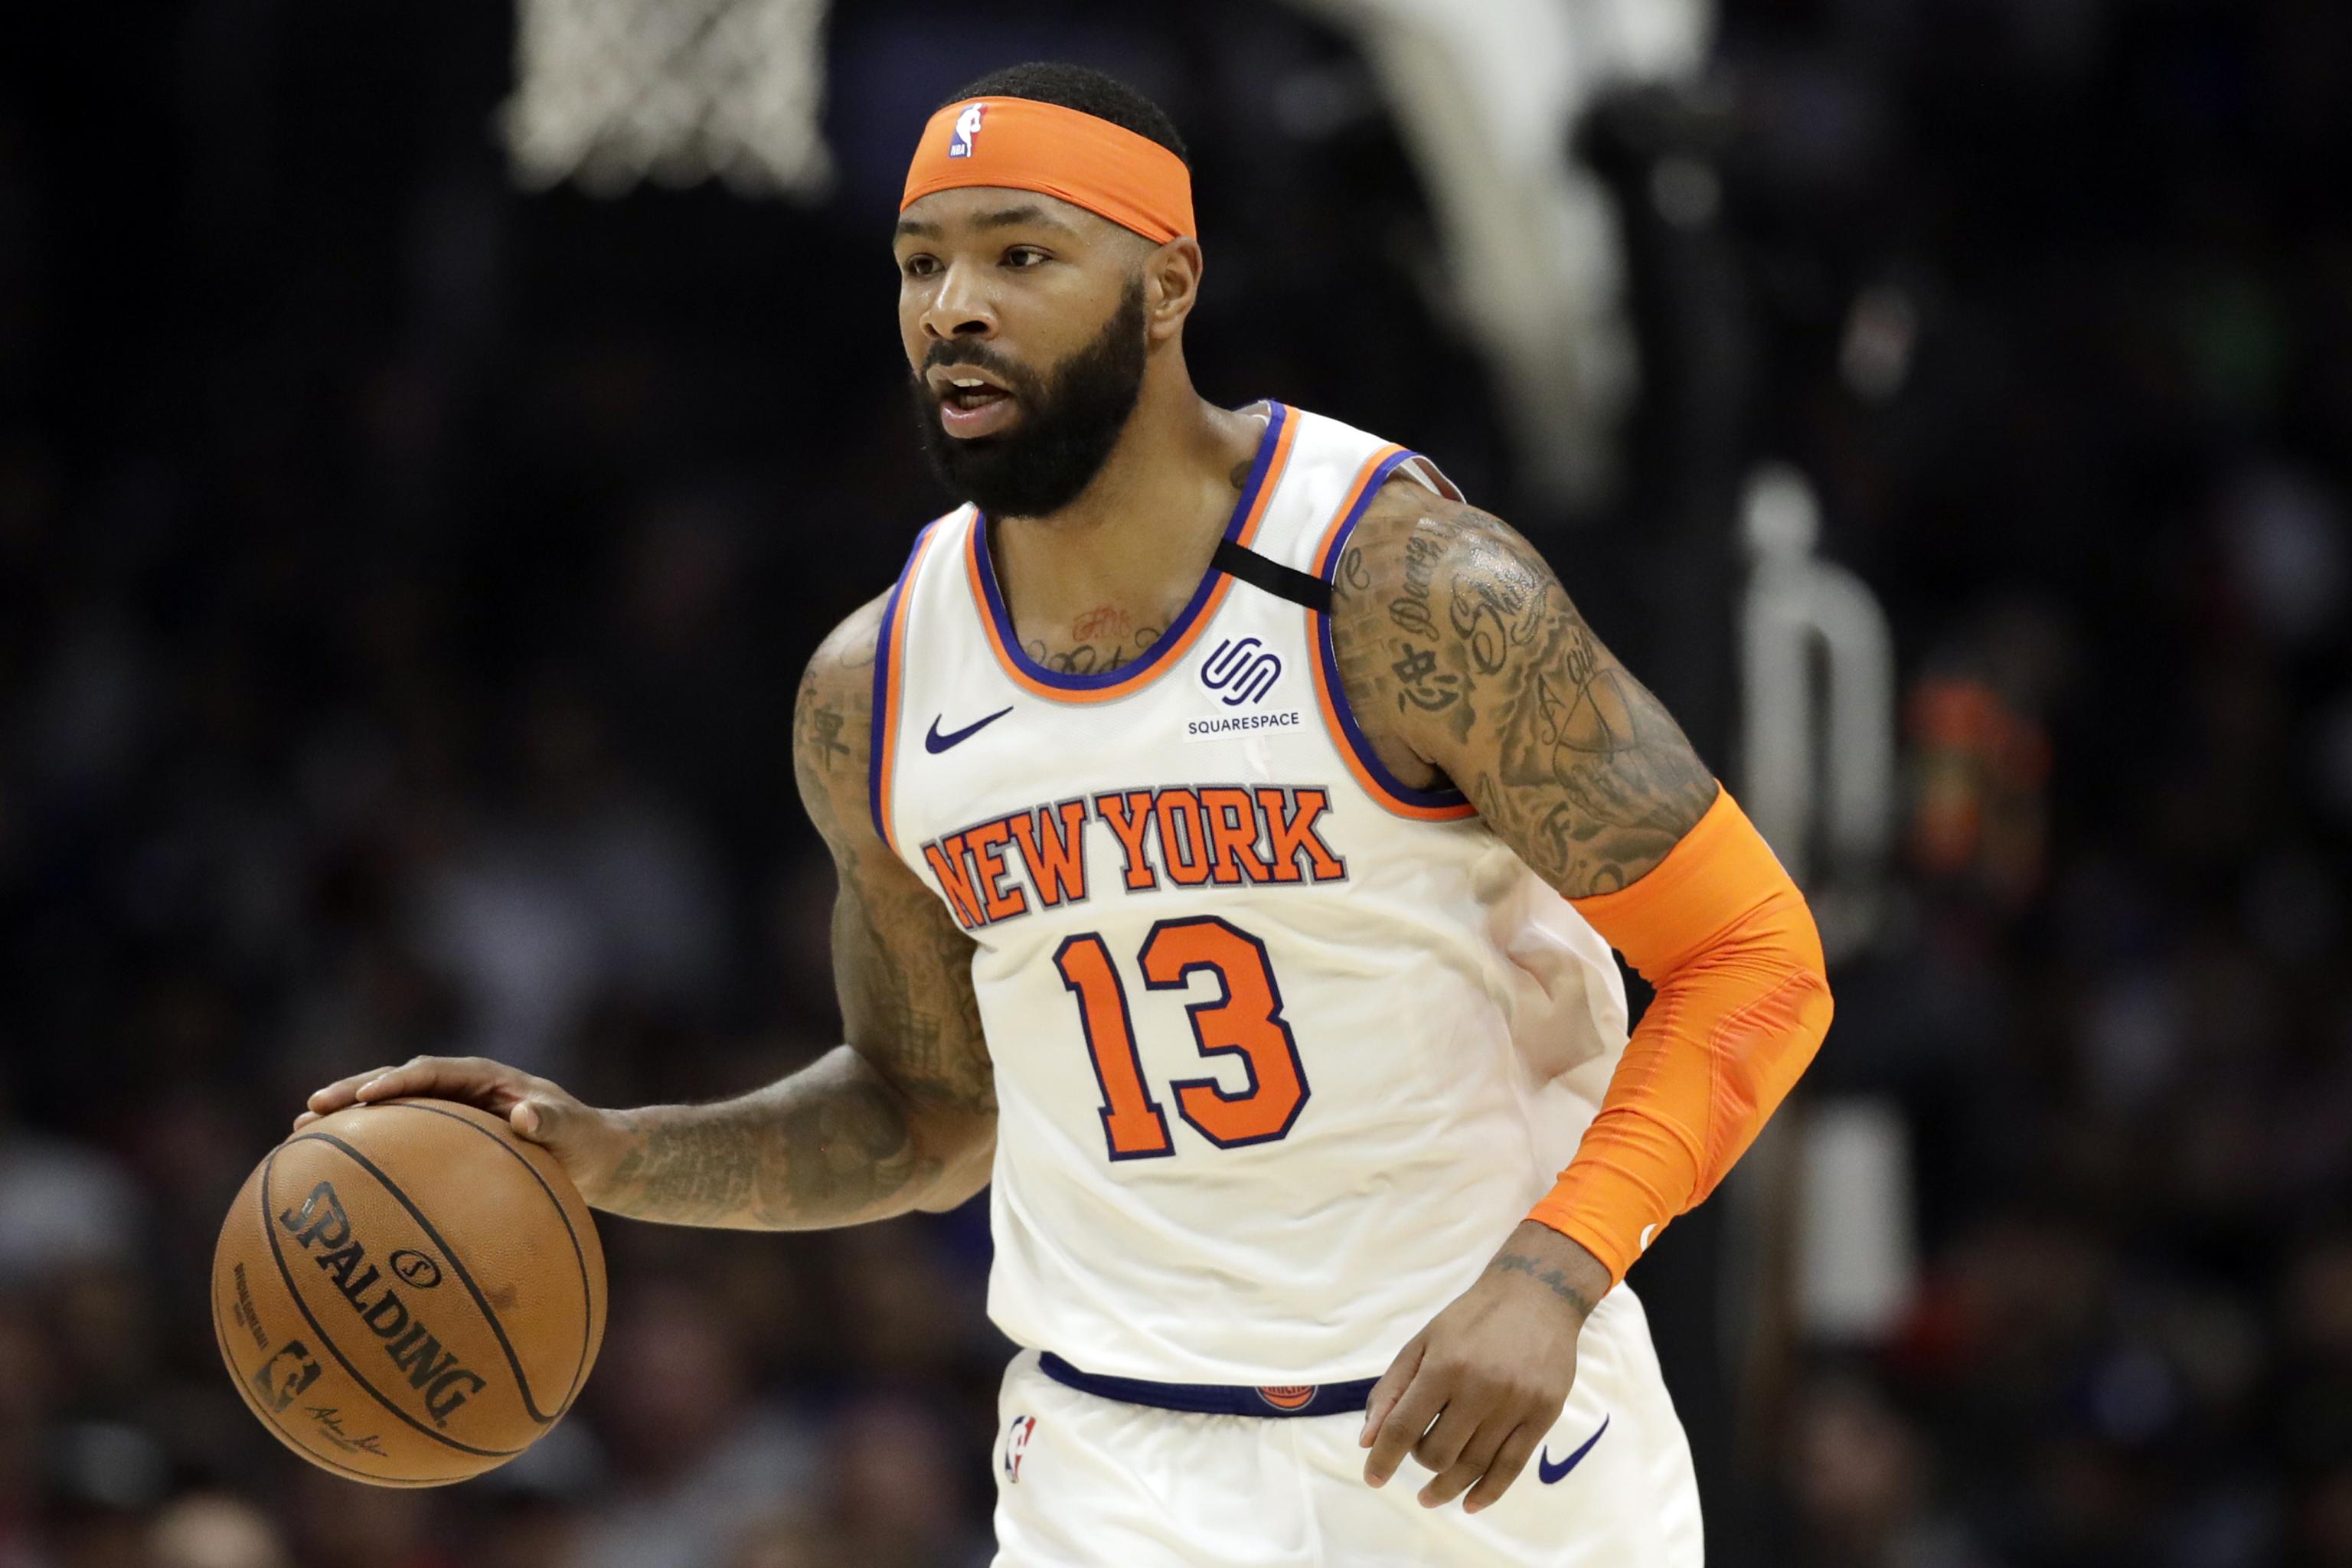 Nba Trade Rumors Breaking Down League Buzz Ahead Of 2020 Trade Deadline Bleacher Report Latest News Videos And Highlights